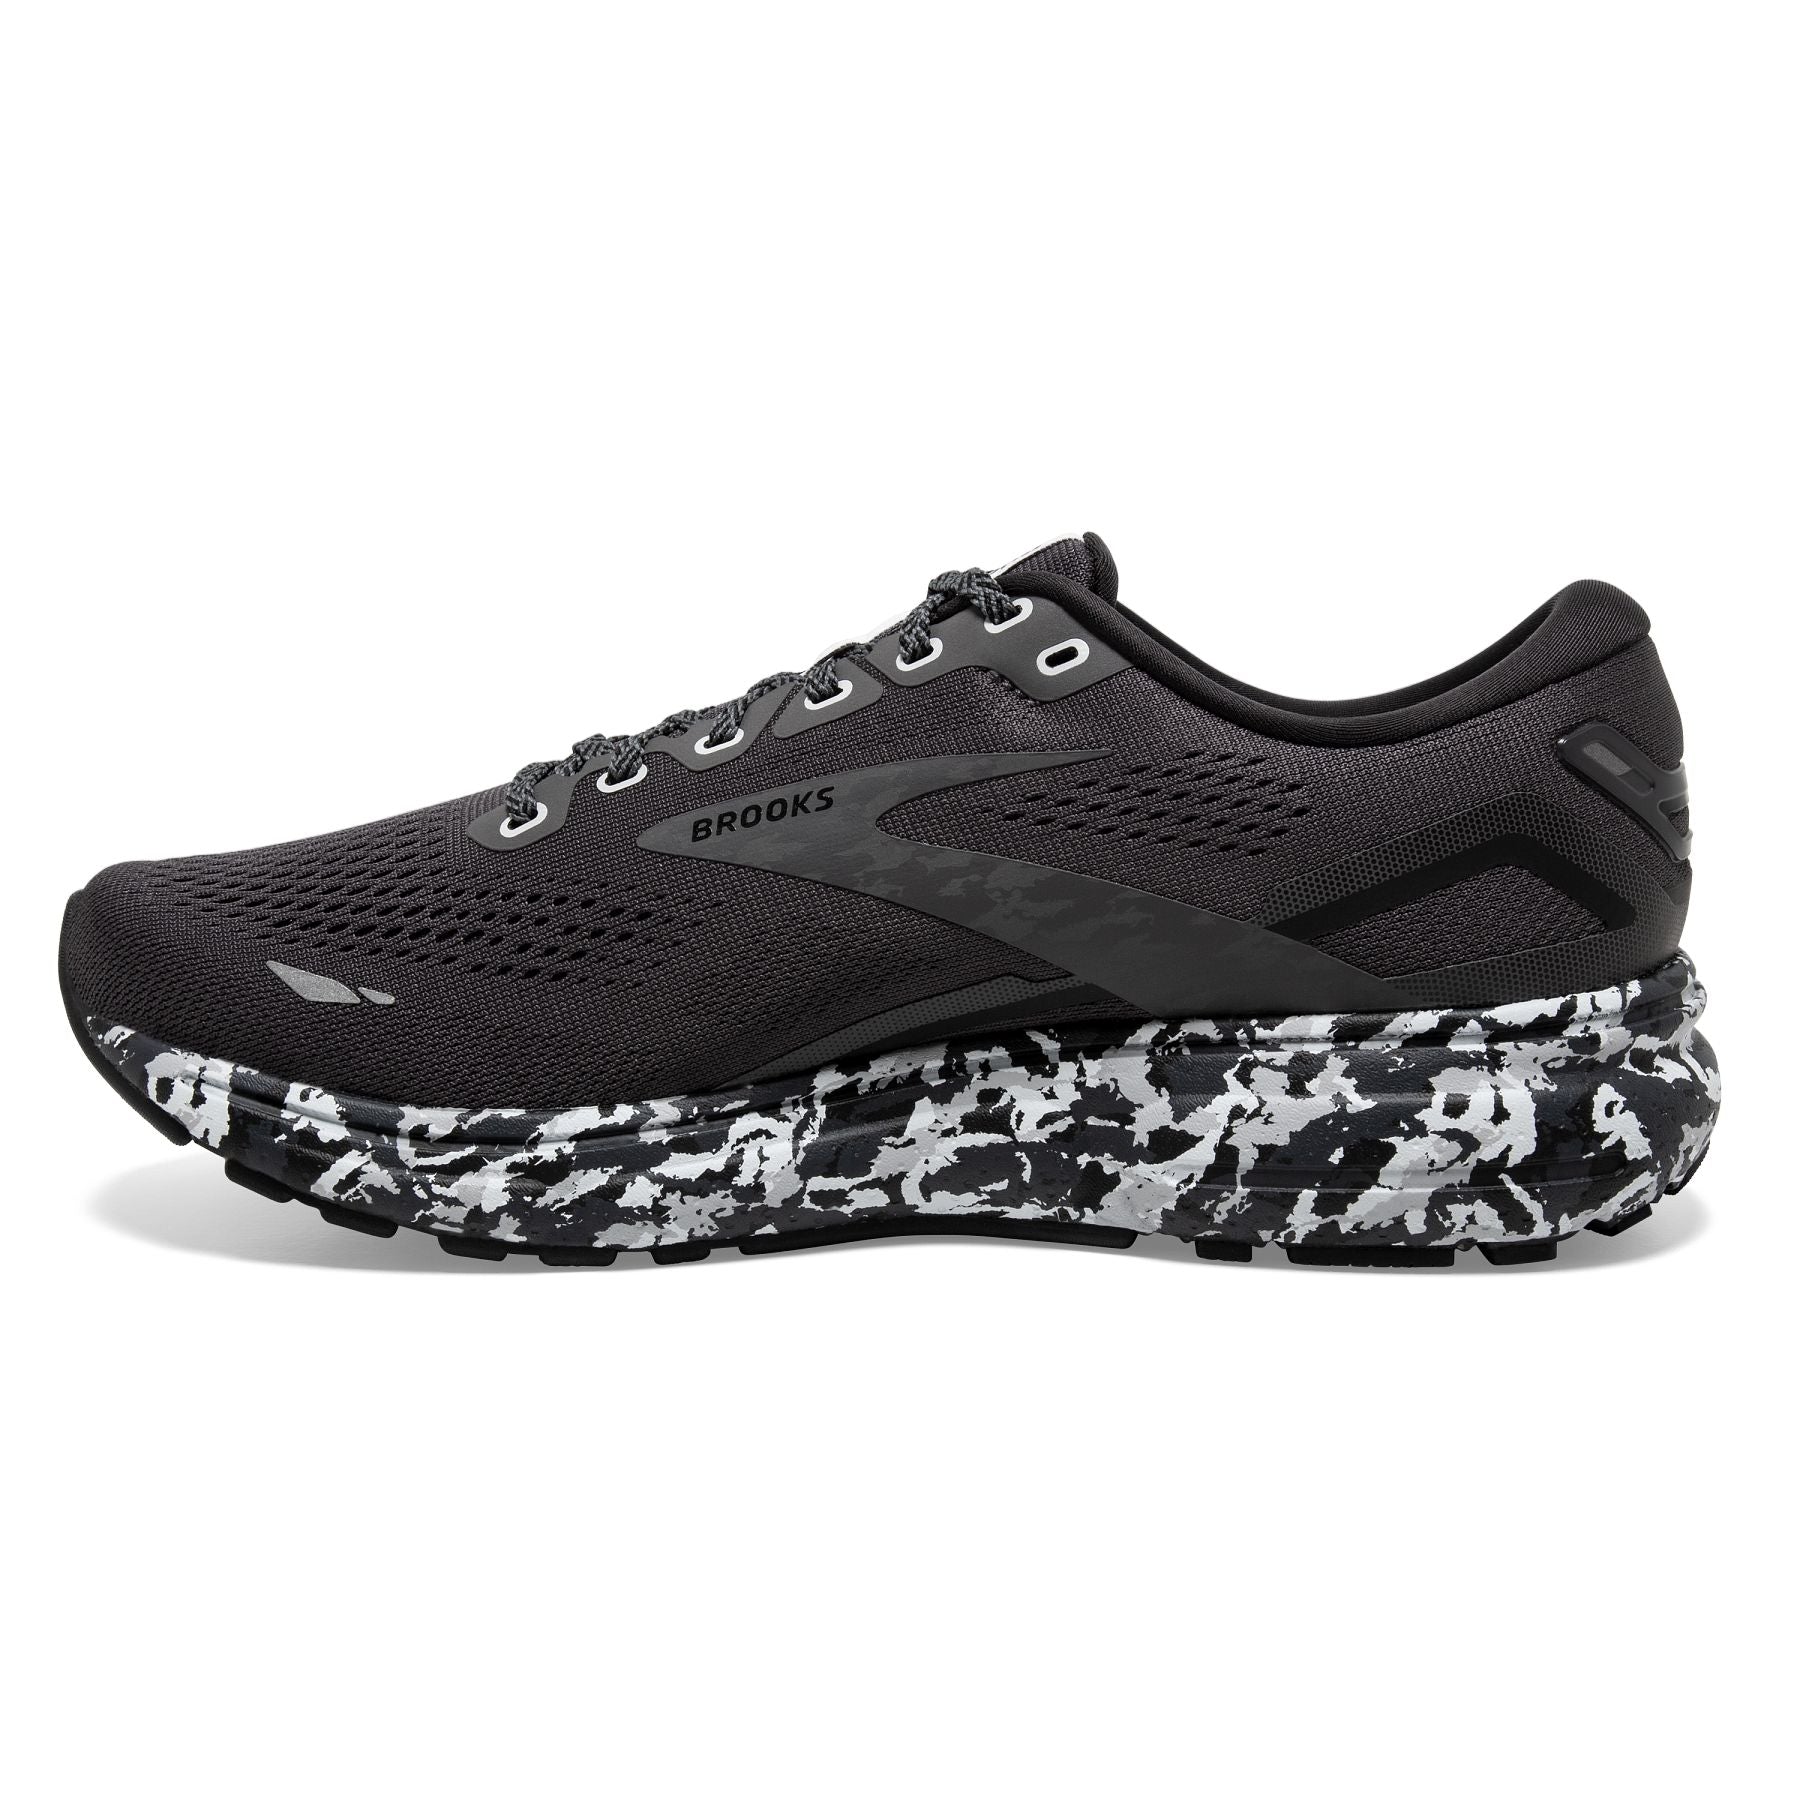 Medial view of the Men's Ghost 15 by Brooks in the color Ebony/Black/Oyster